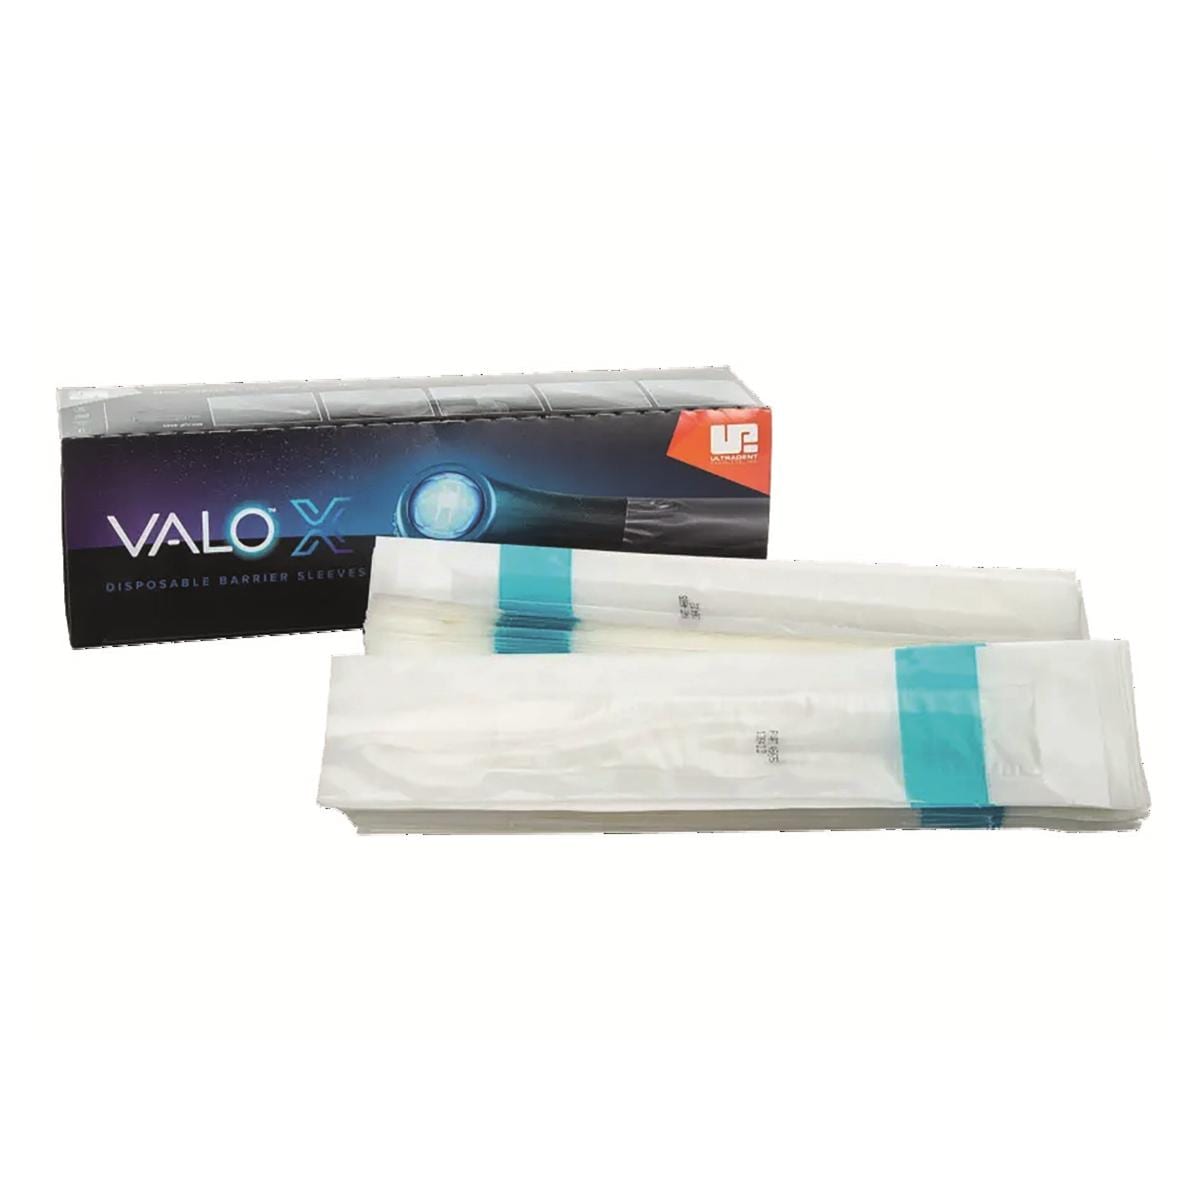 Manchons de protection - Valo X - UP4665 - ULTRADENT